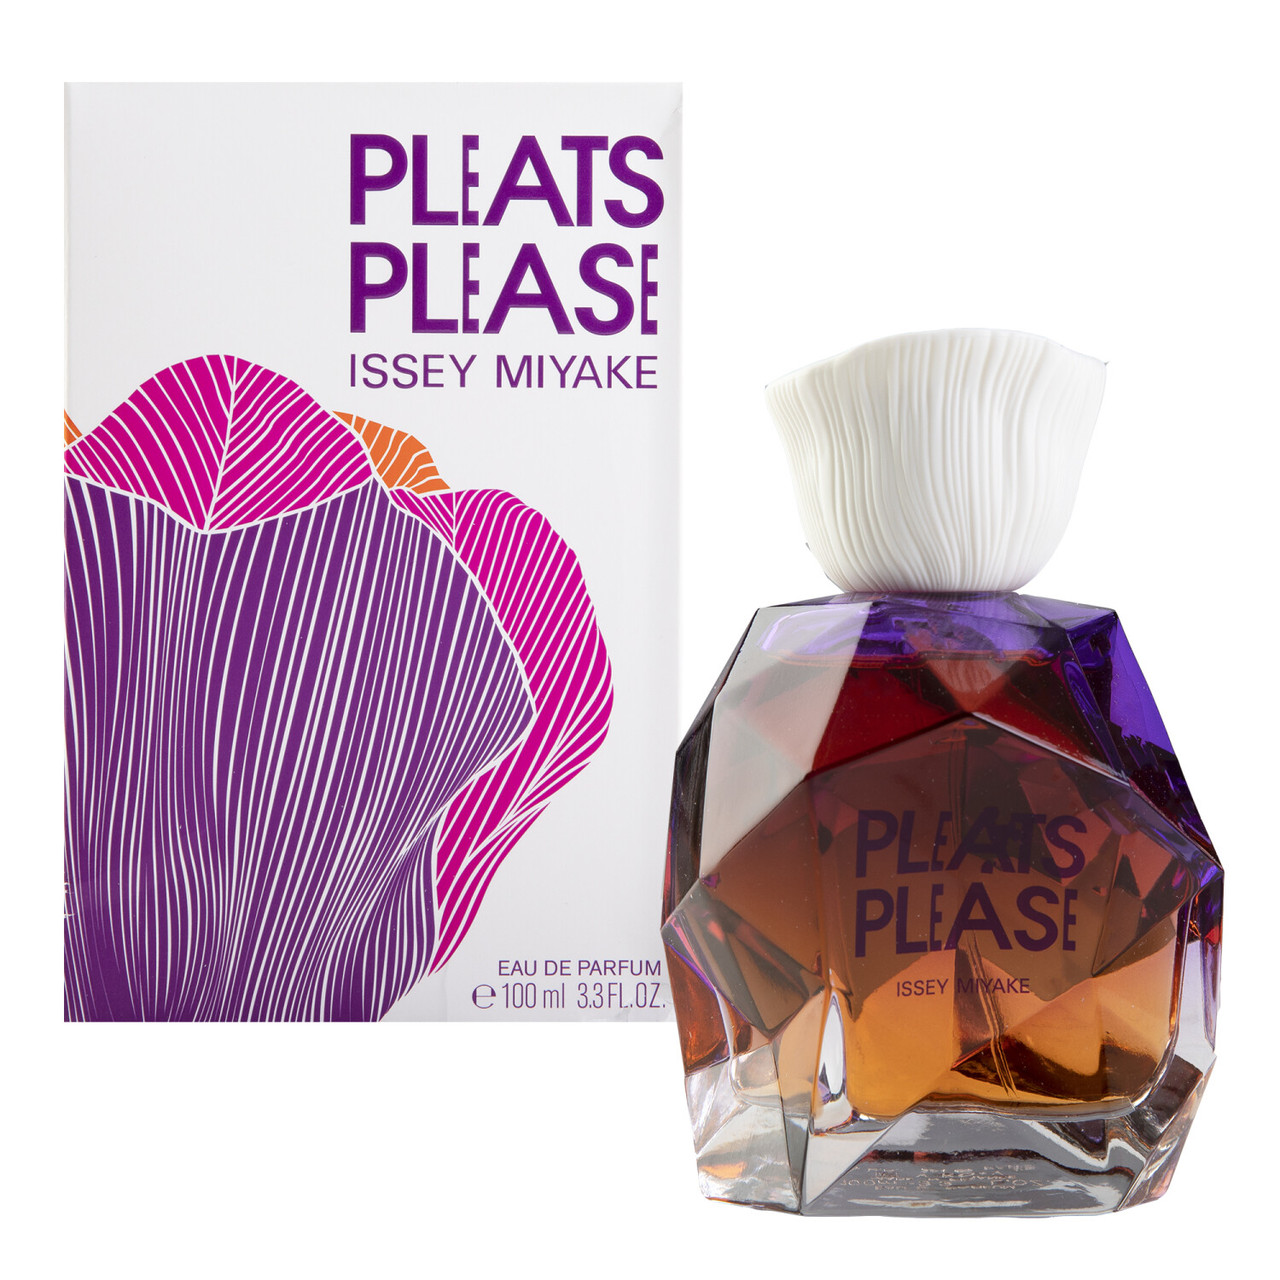 PLEATS PLEASE L'EAU BY ISSEY MIYAKE by Issey Miyake 